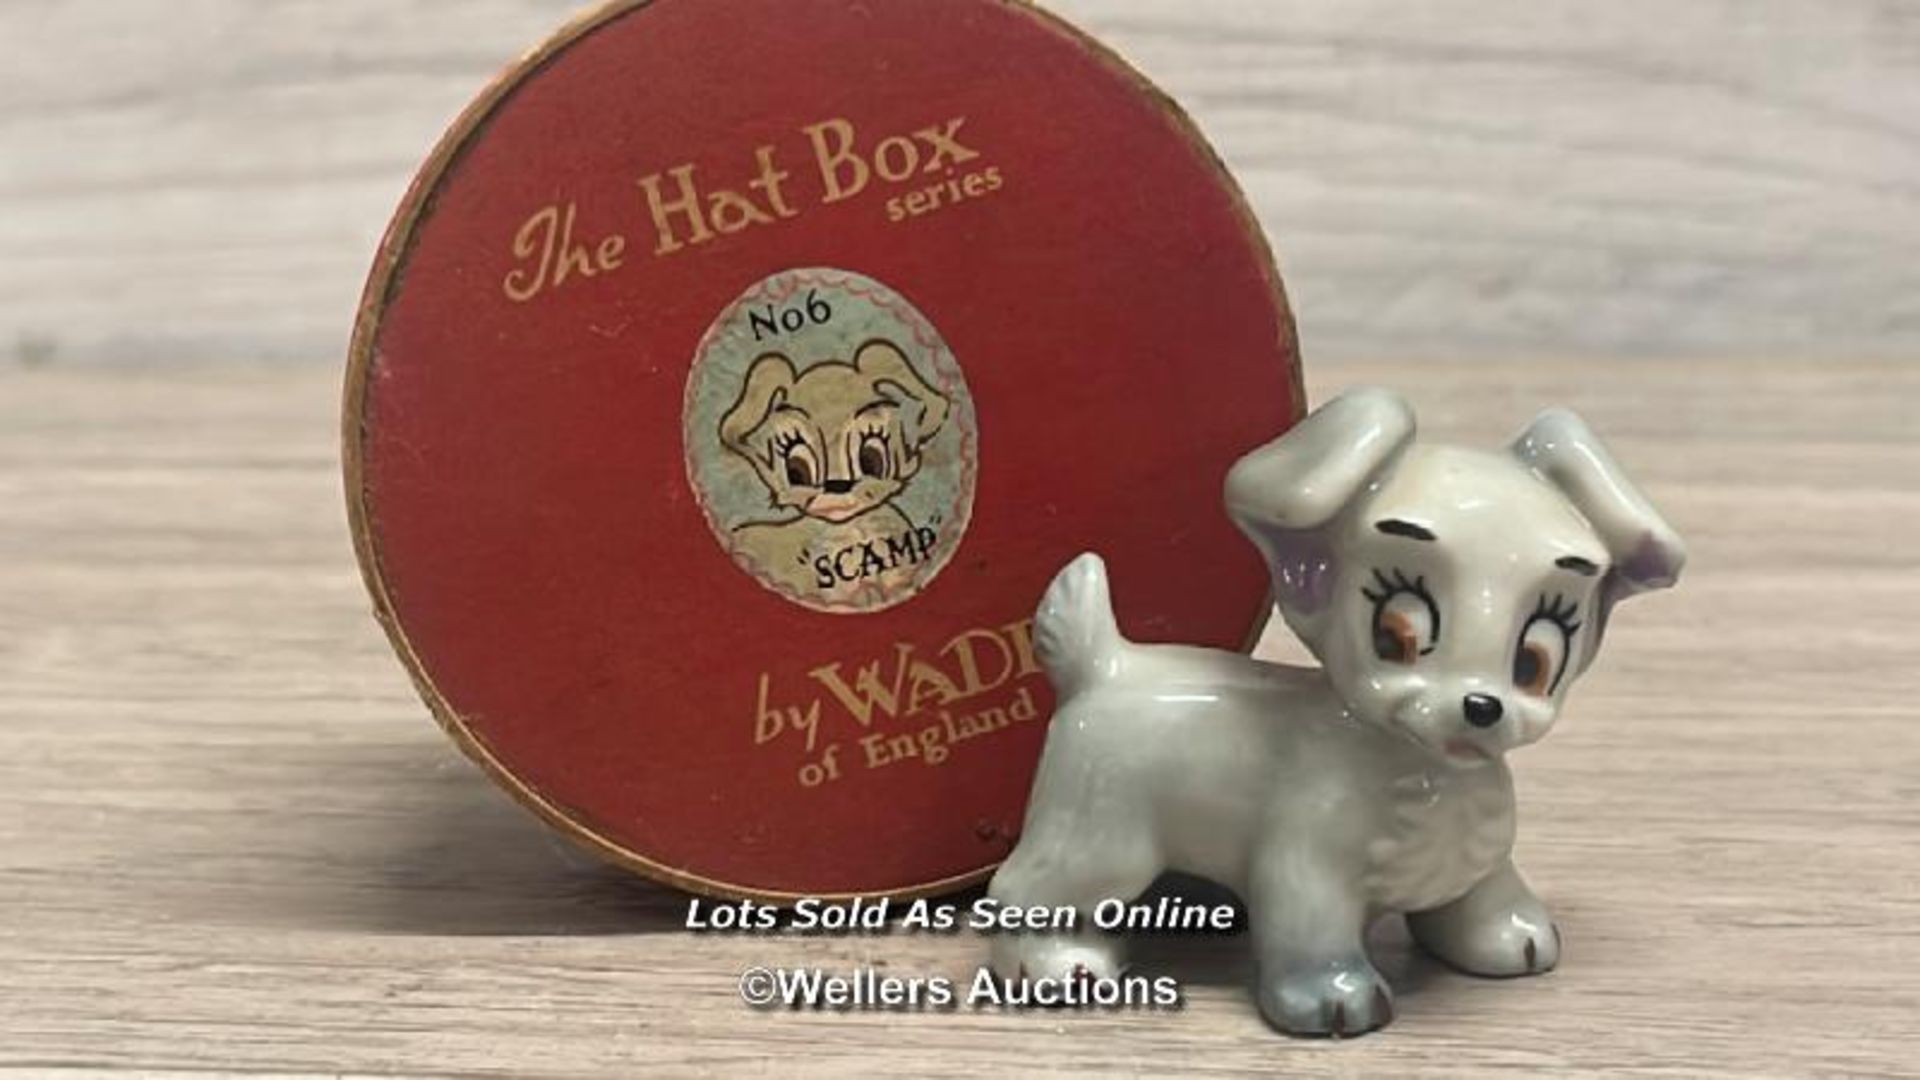 FOUR DISNEY HAT BOX SERIES FUGURINES BY WADE INCLUDING BAMBI, THUMPER, SCAMP AND LUCKY - Image 3 of 5